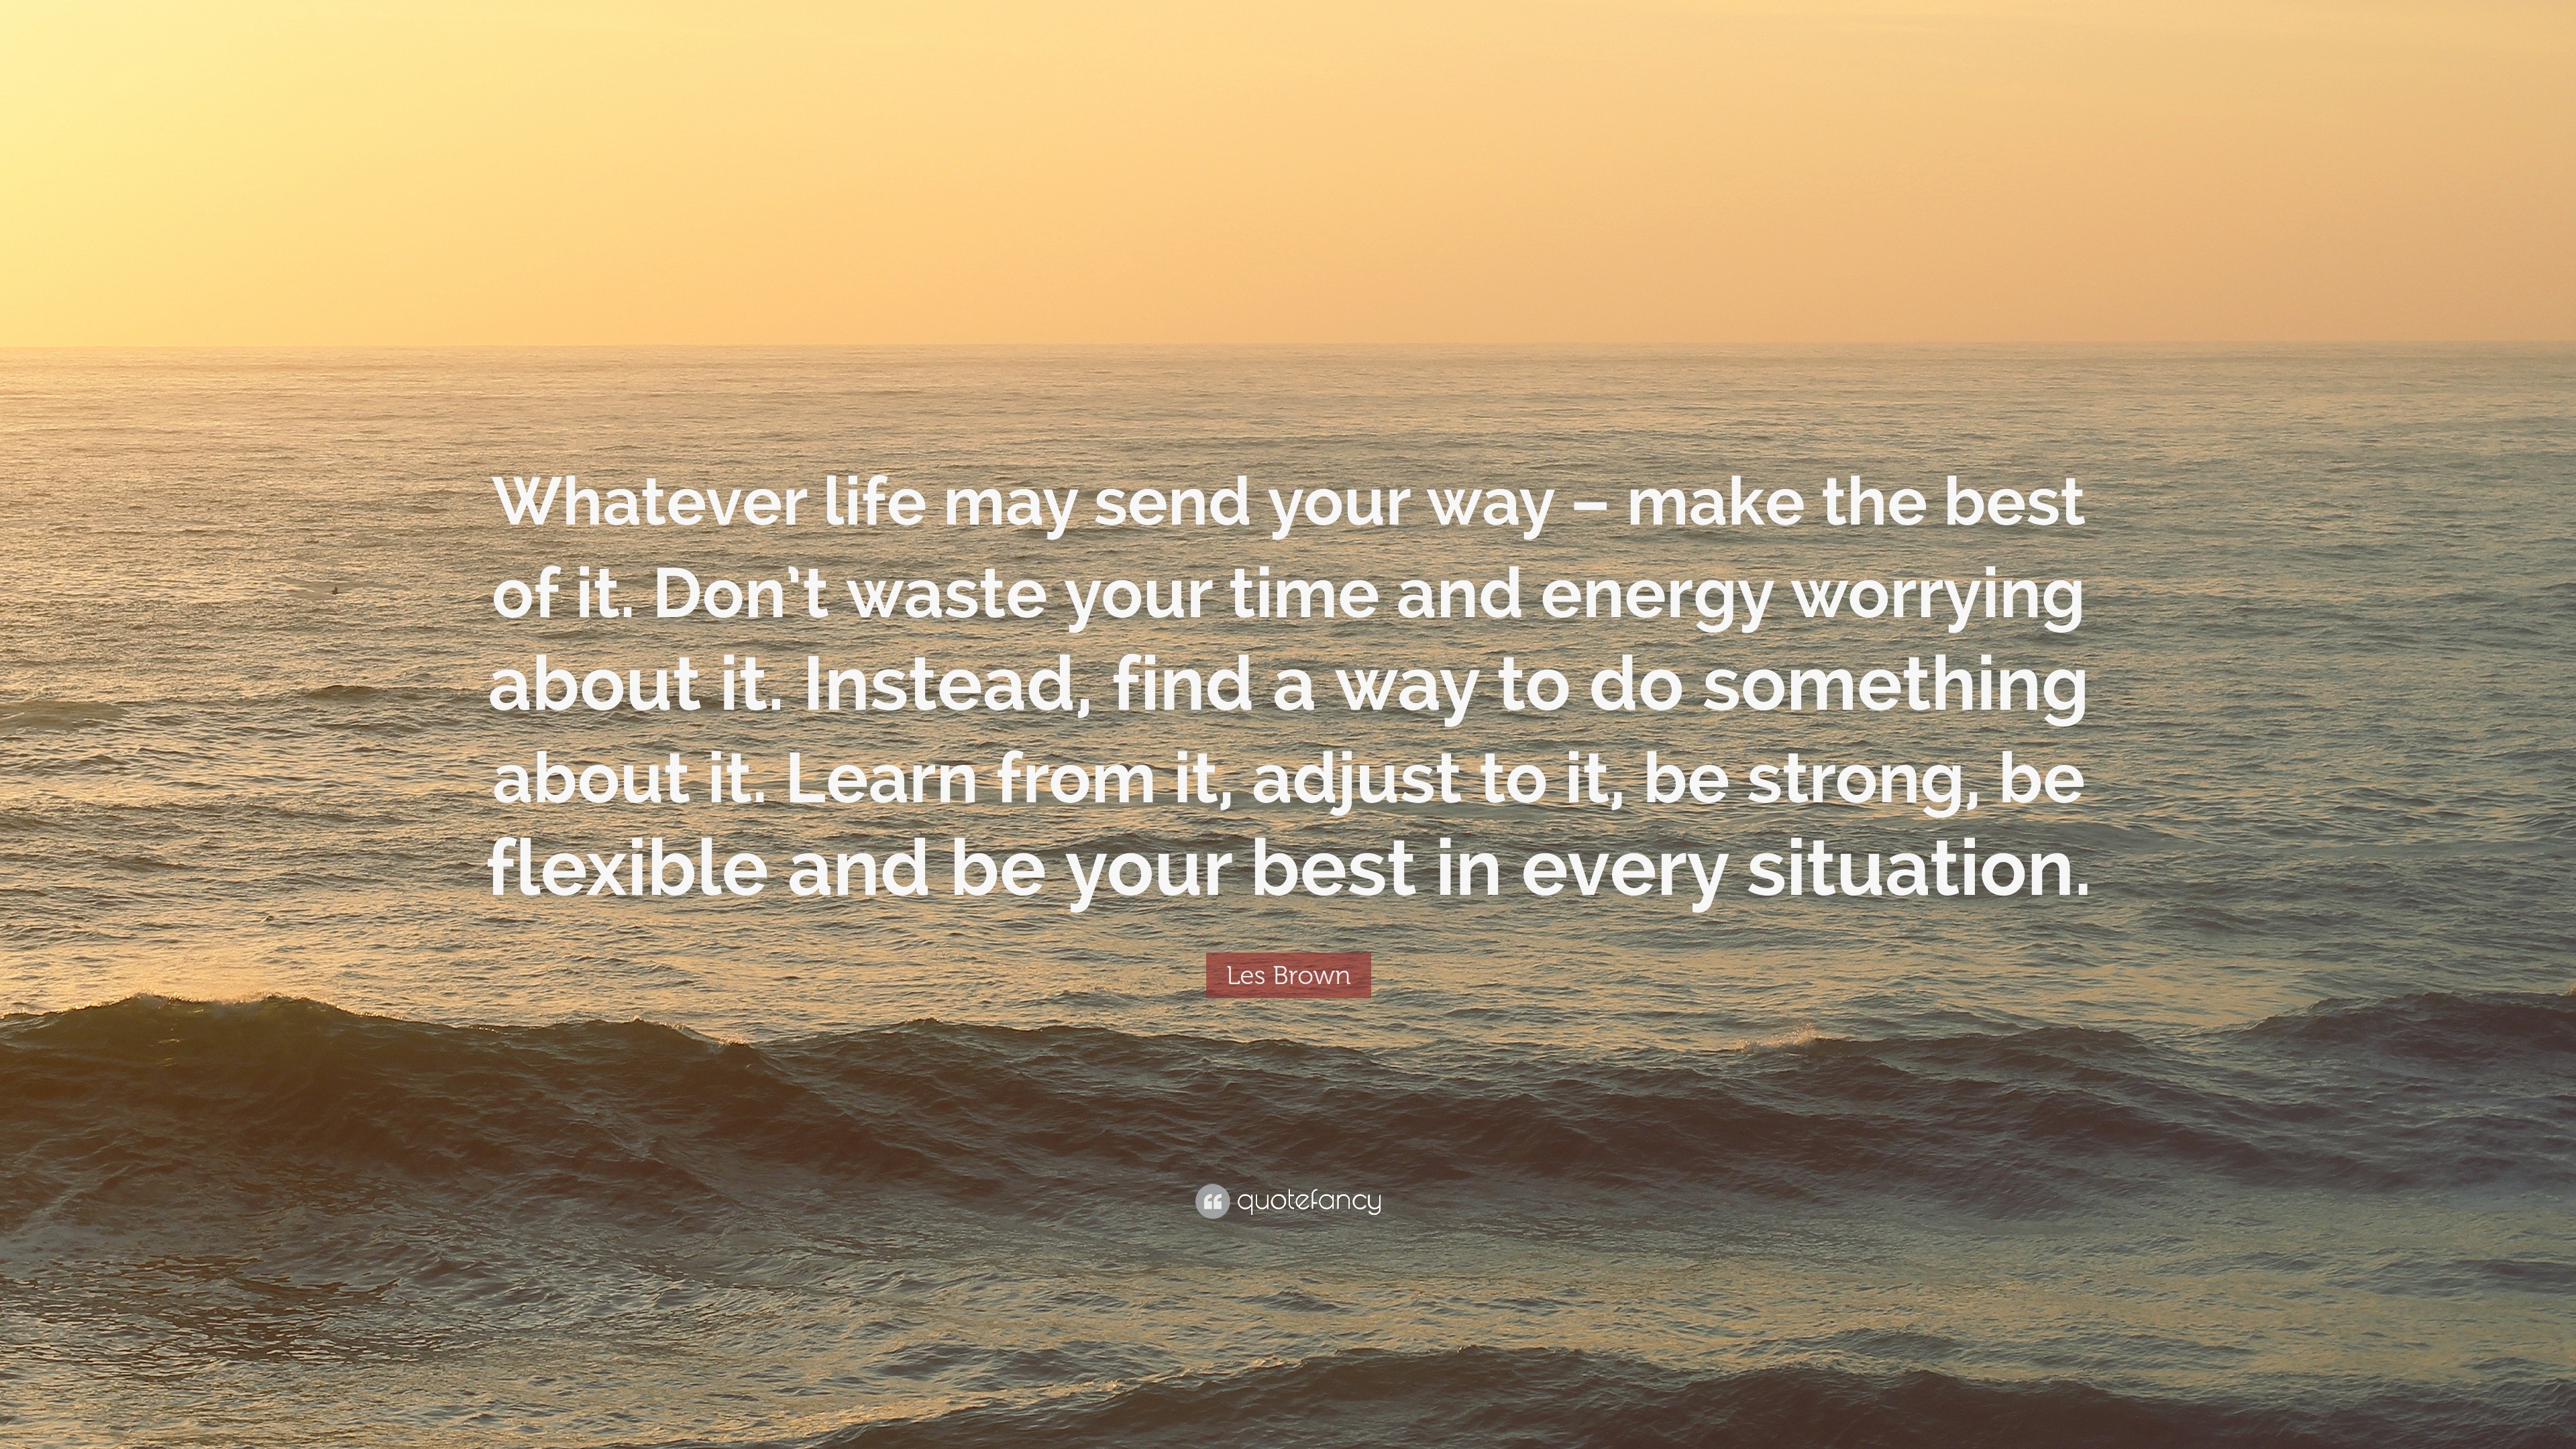 Les Brown Quote: “Whatever life may send your way – make the best of it ...